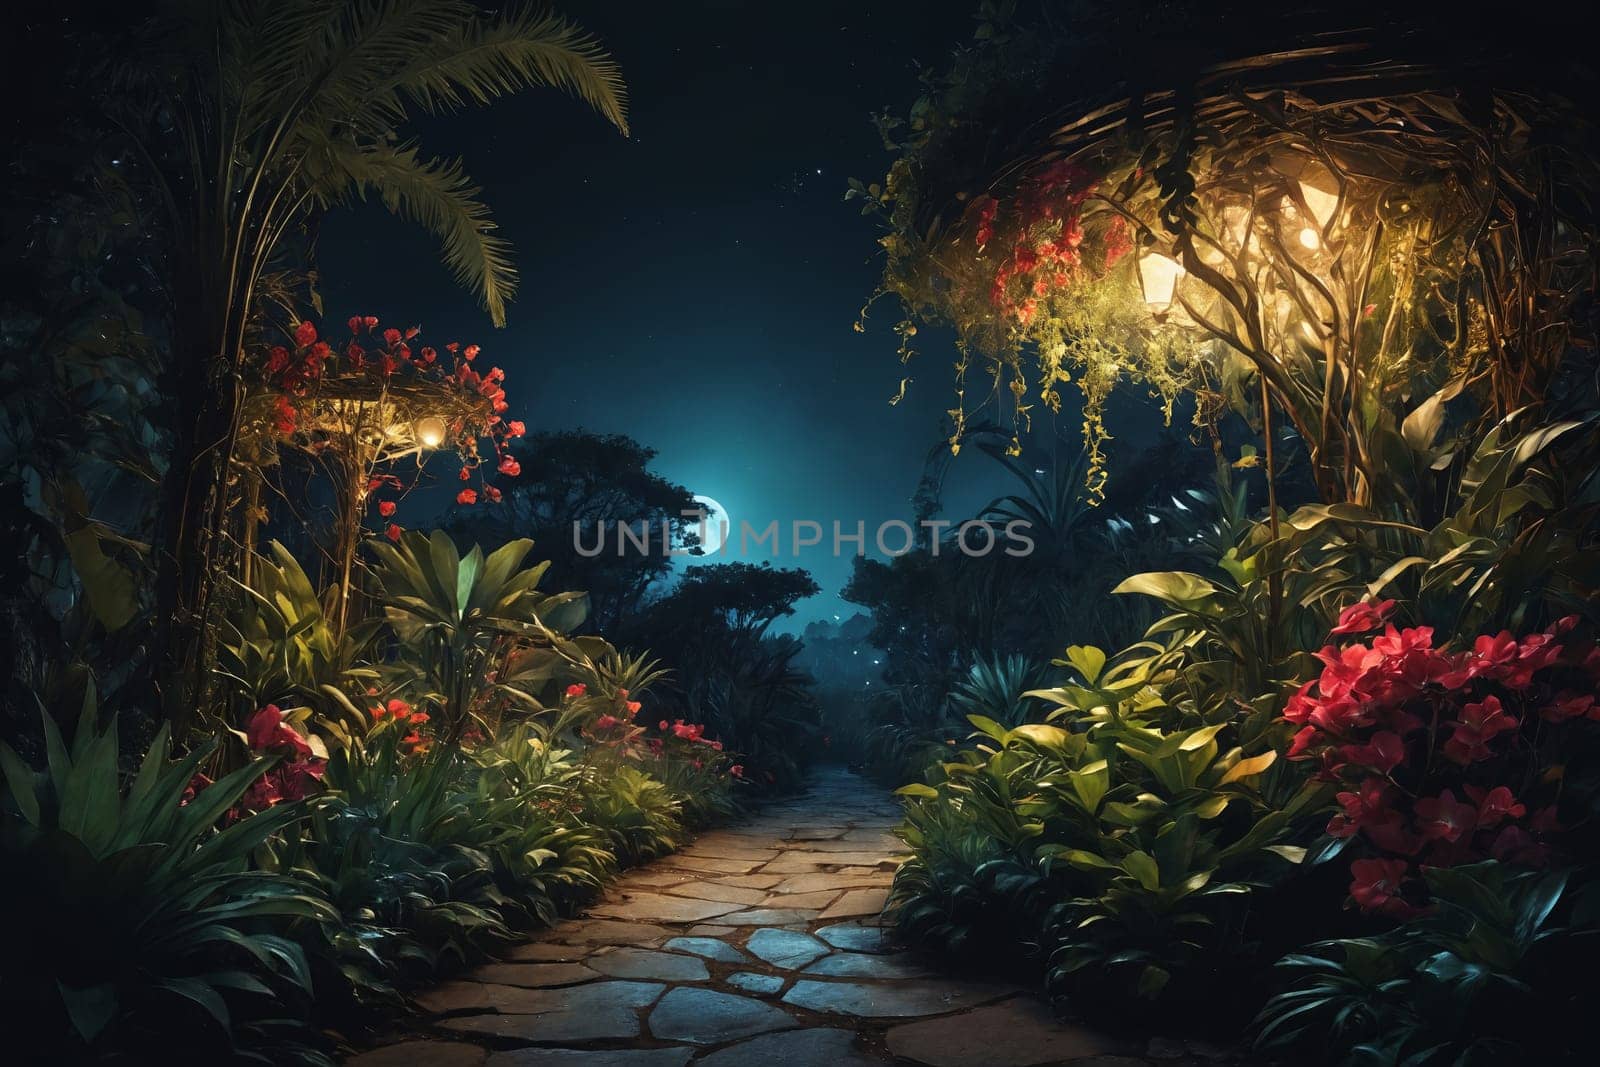 Lighted Path to Serenity: Enchanting Tropical Garden Illuminated by Moonlight and Lanterns by Andre1ns